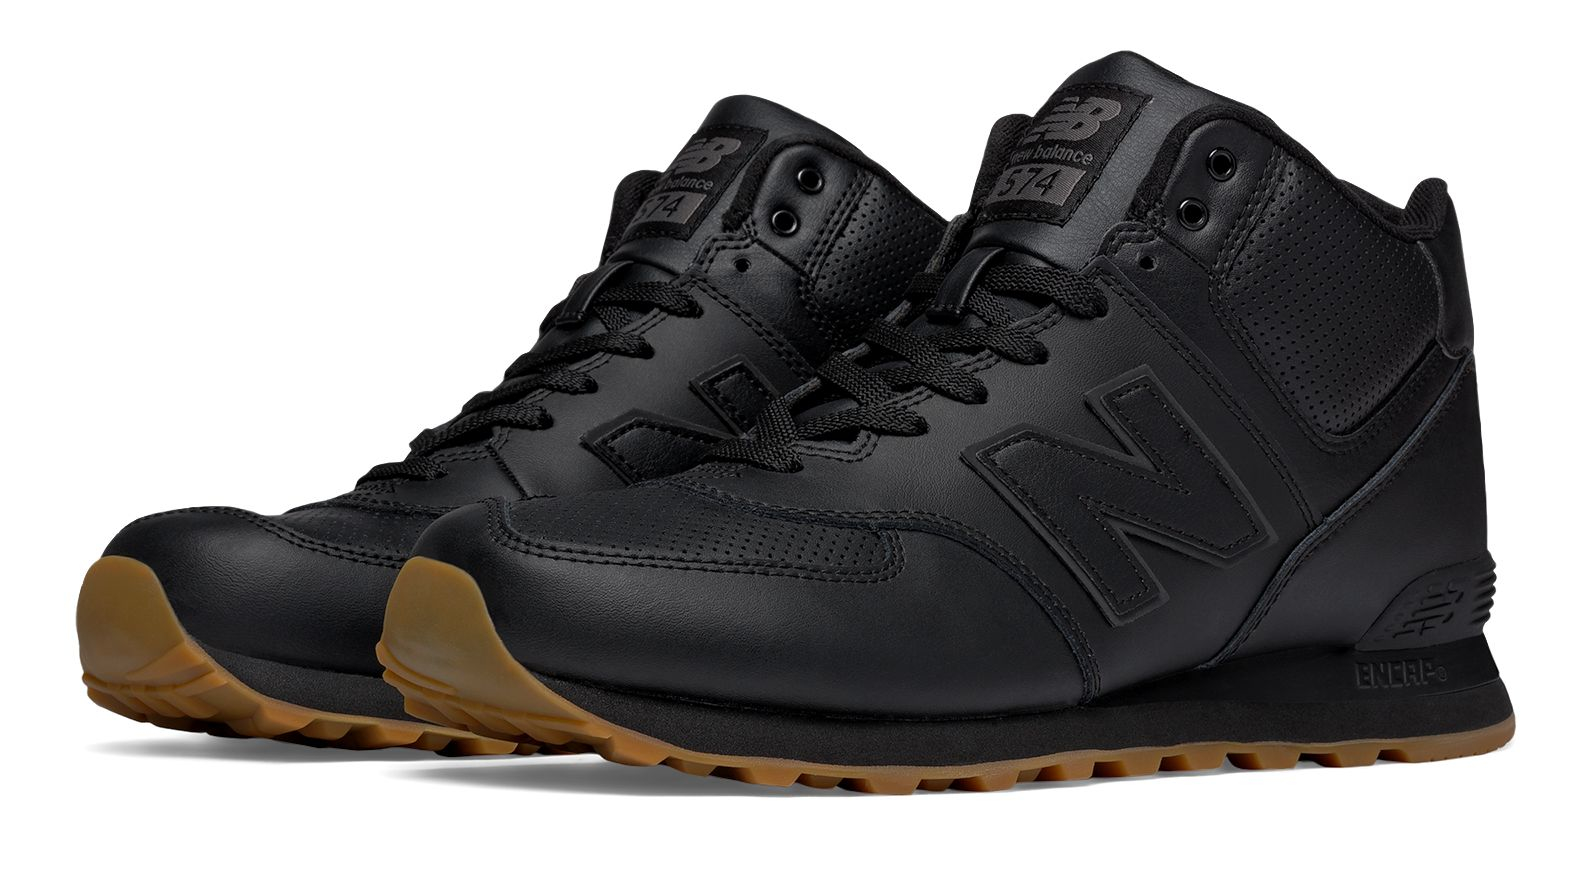 New Balance 574 'Leather' In Black/Gum Available Now – Feature ...